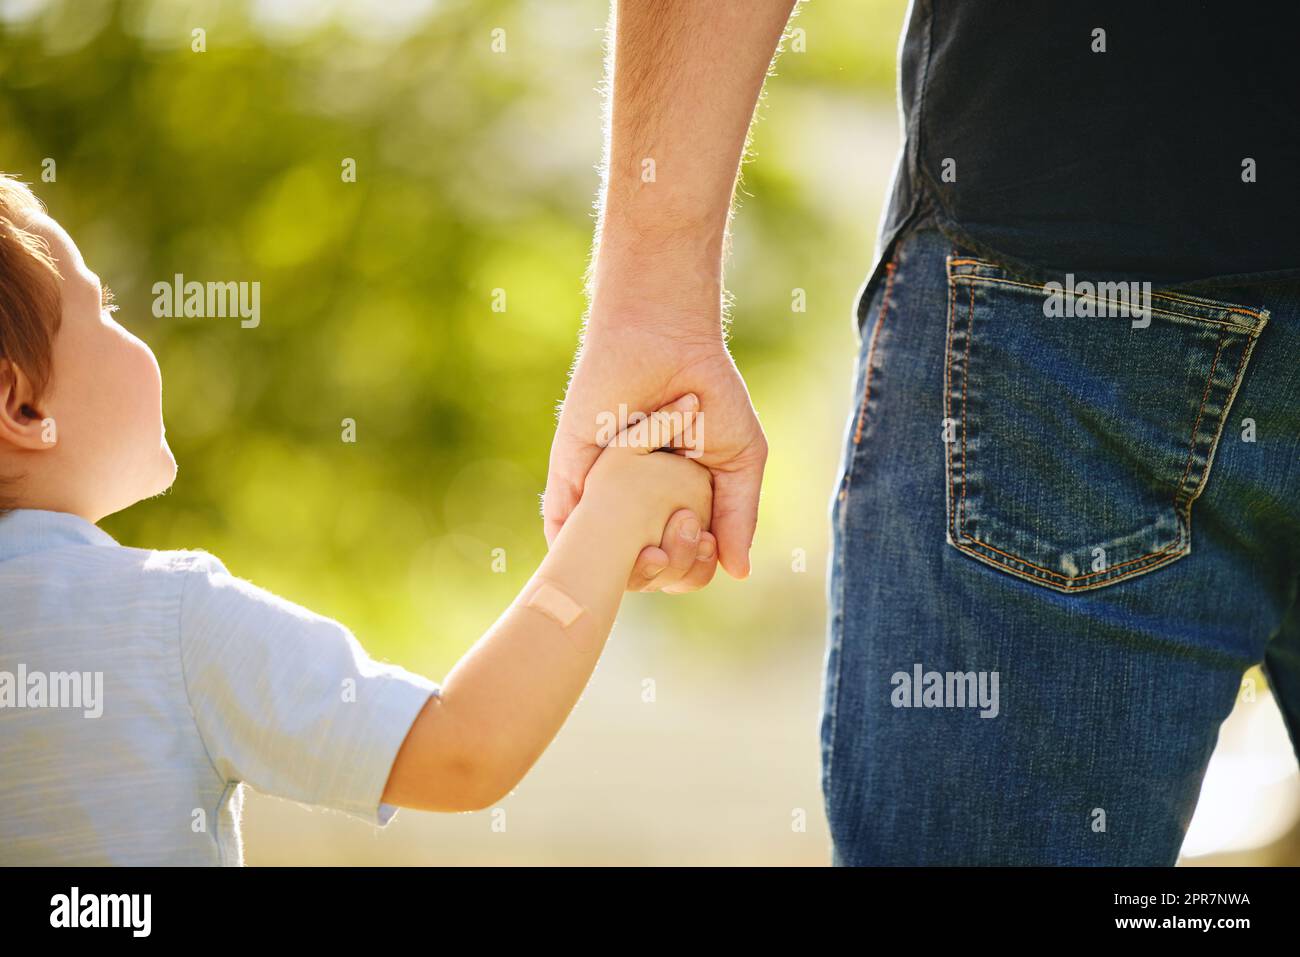 Hell always have a hand to hold. Shot of a little boy holding his dads hand on a walk in the park. Stock Photo